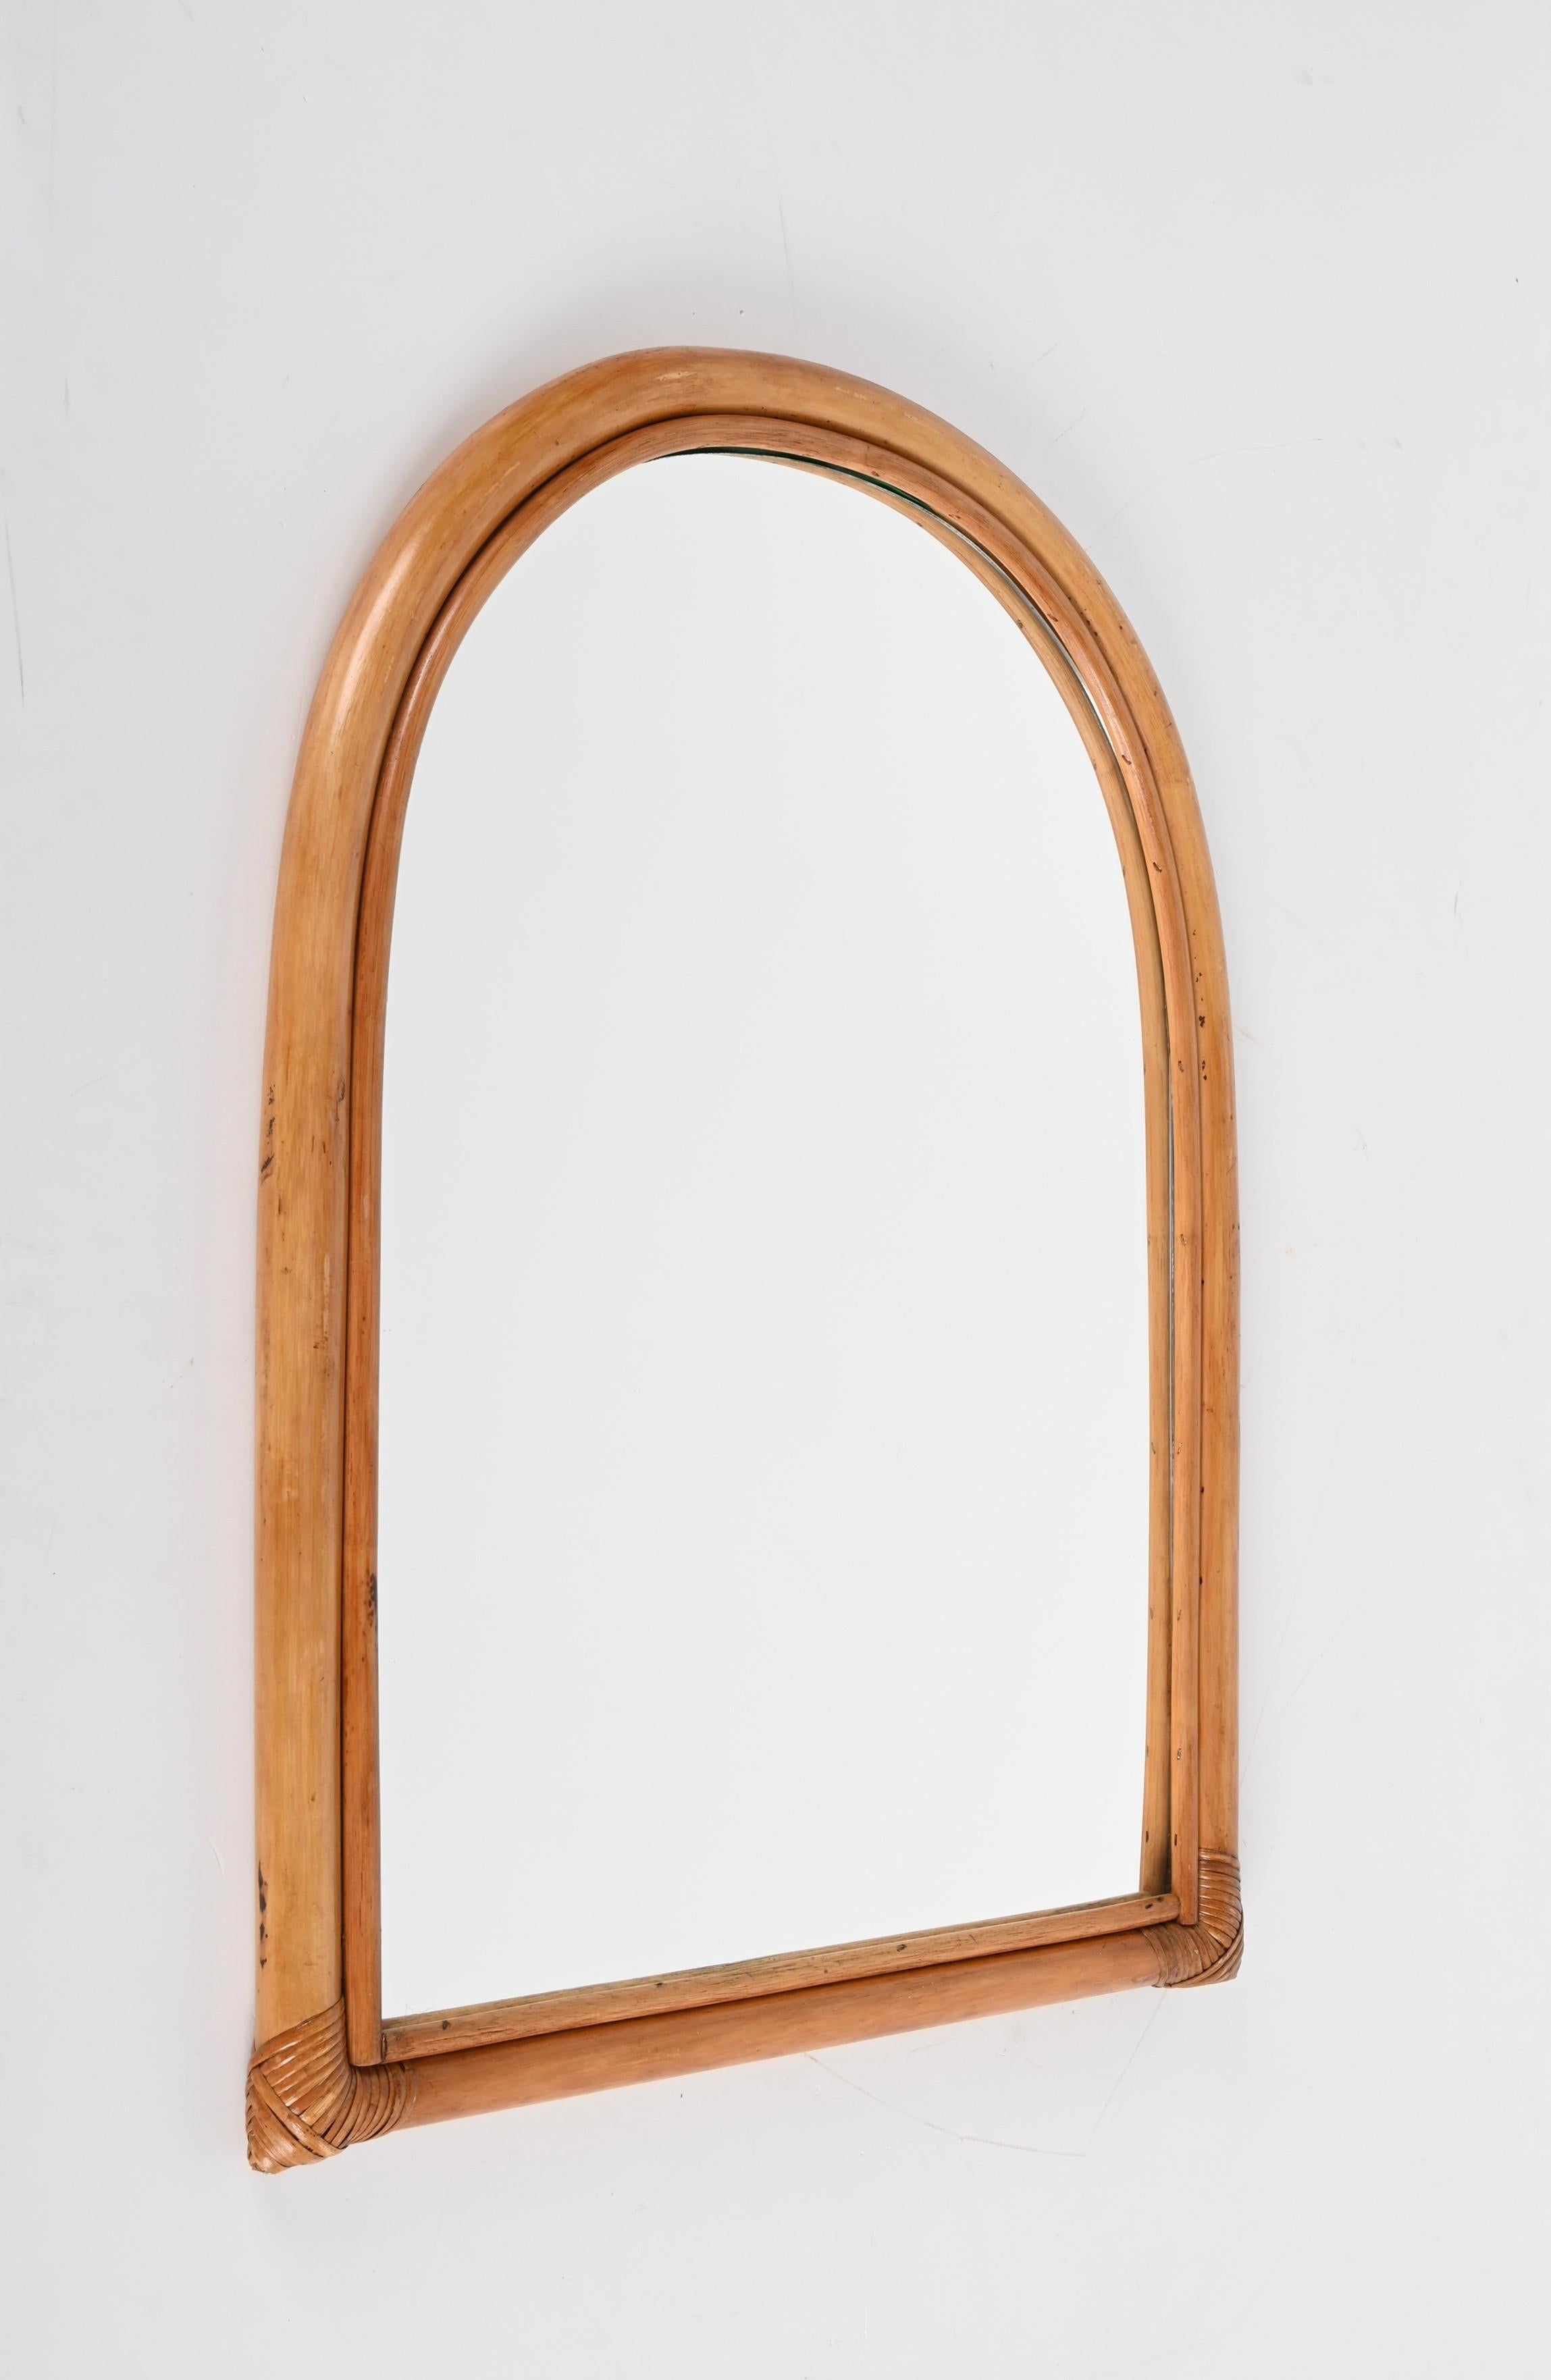 Wonderful midcentury arched-shaped mirror with double bamboo cane frame. This fantastic item was produced in Italy during the 1970s.

The way the two-round bamboo lines and the glass integrate via the arched wicker is superb and conveys infinite